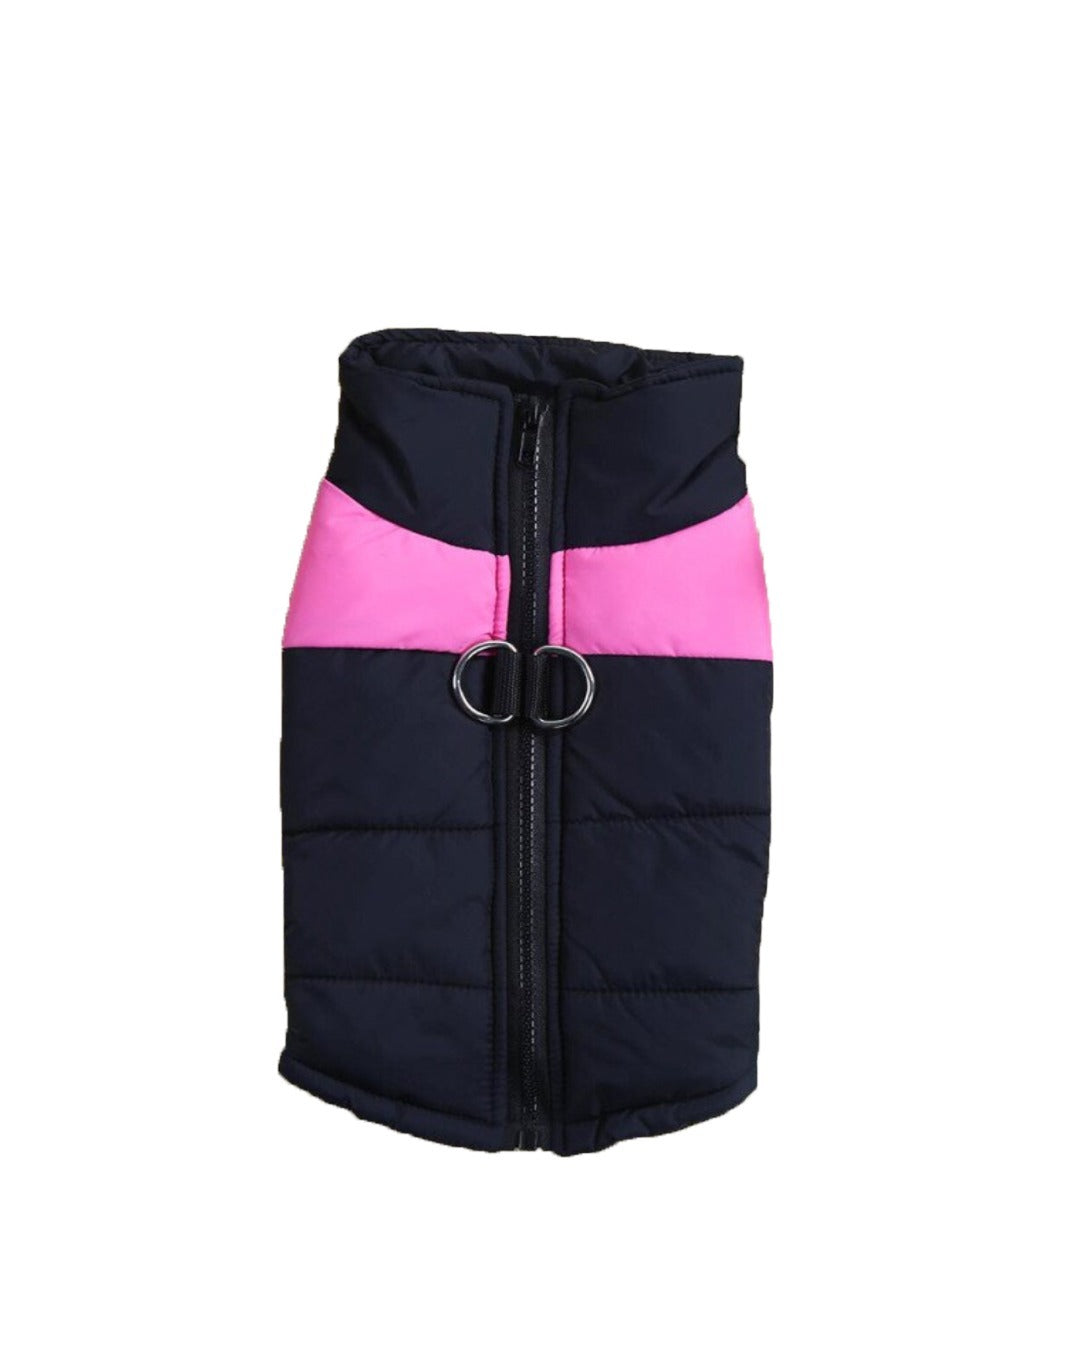 Padded down jacket with integrated bib. Clothing for dogs, cats and pets.